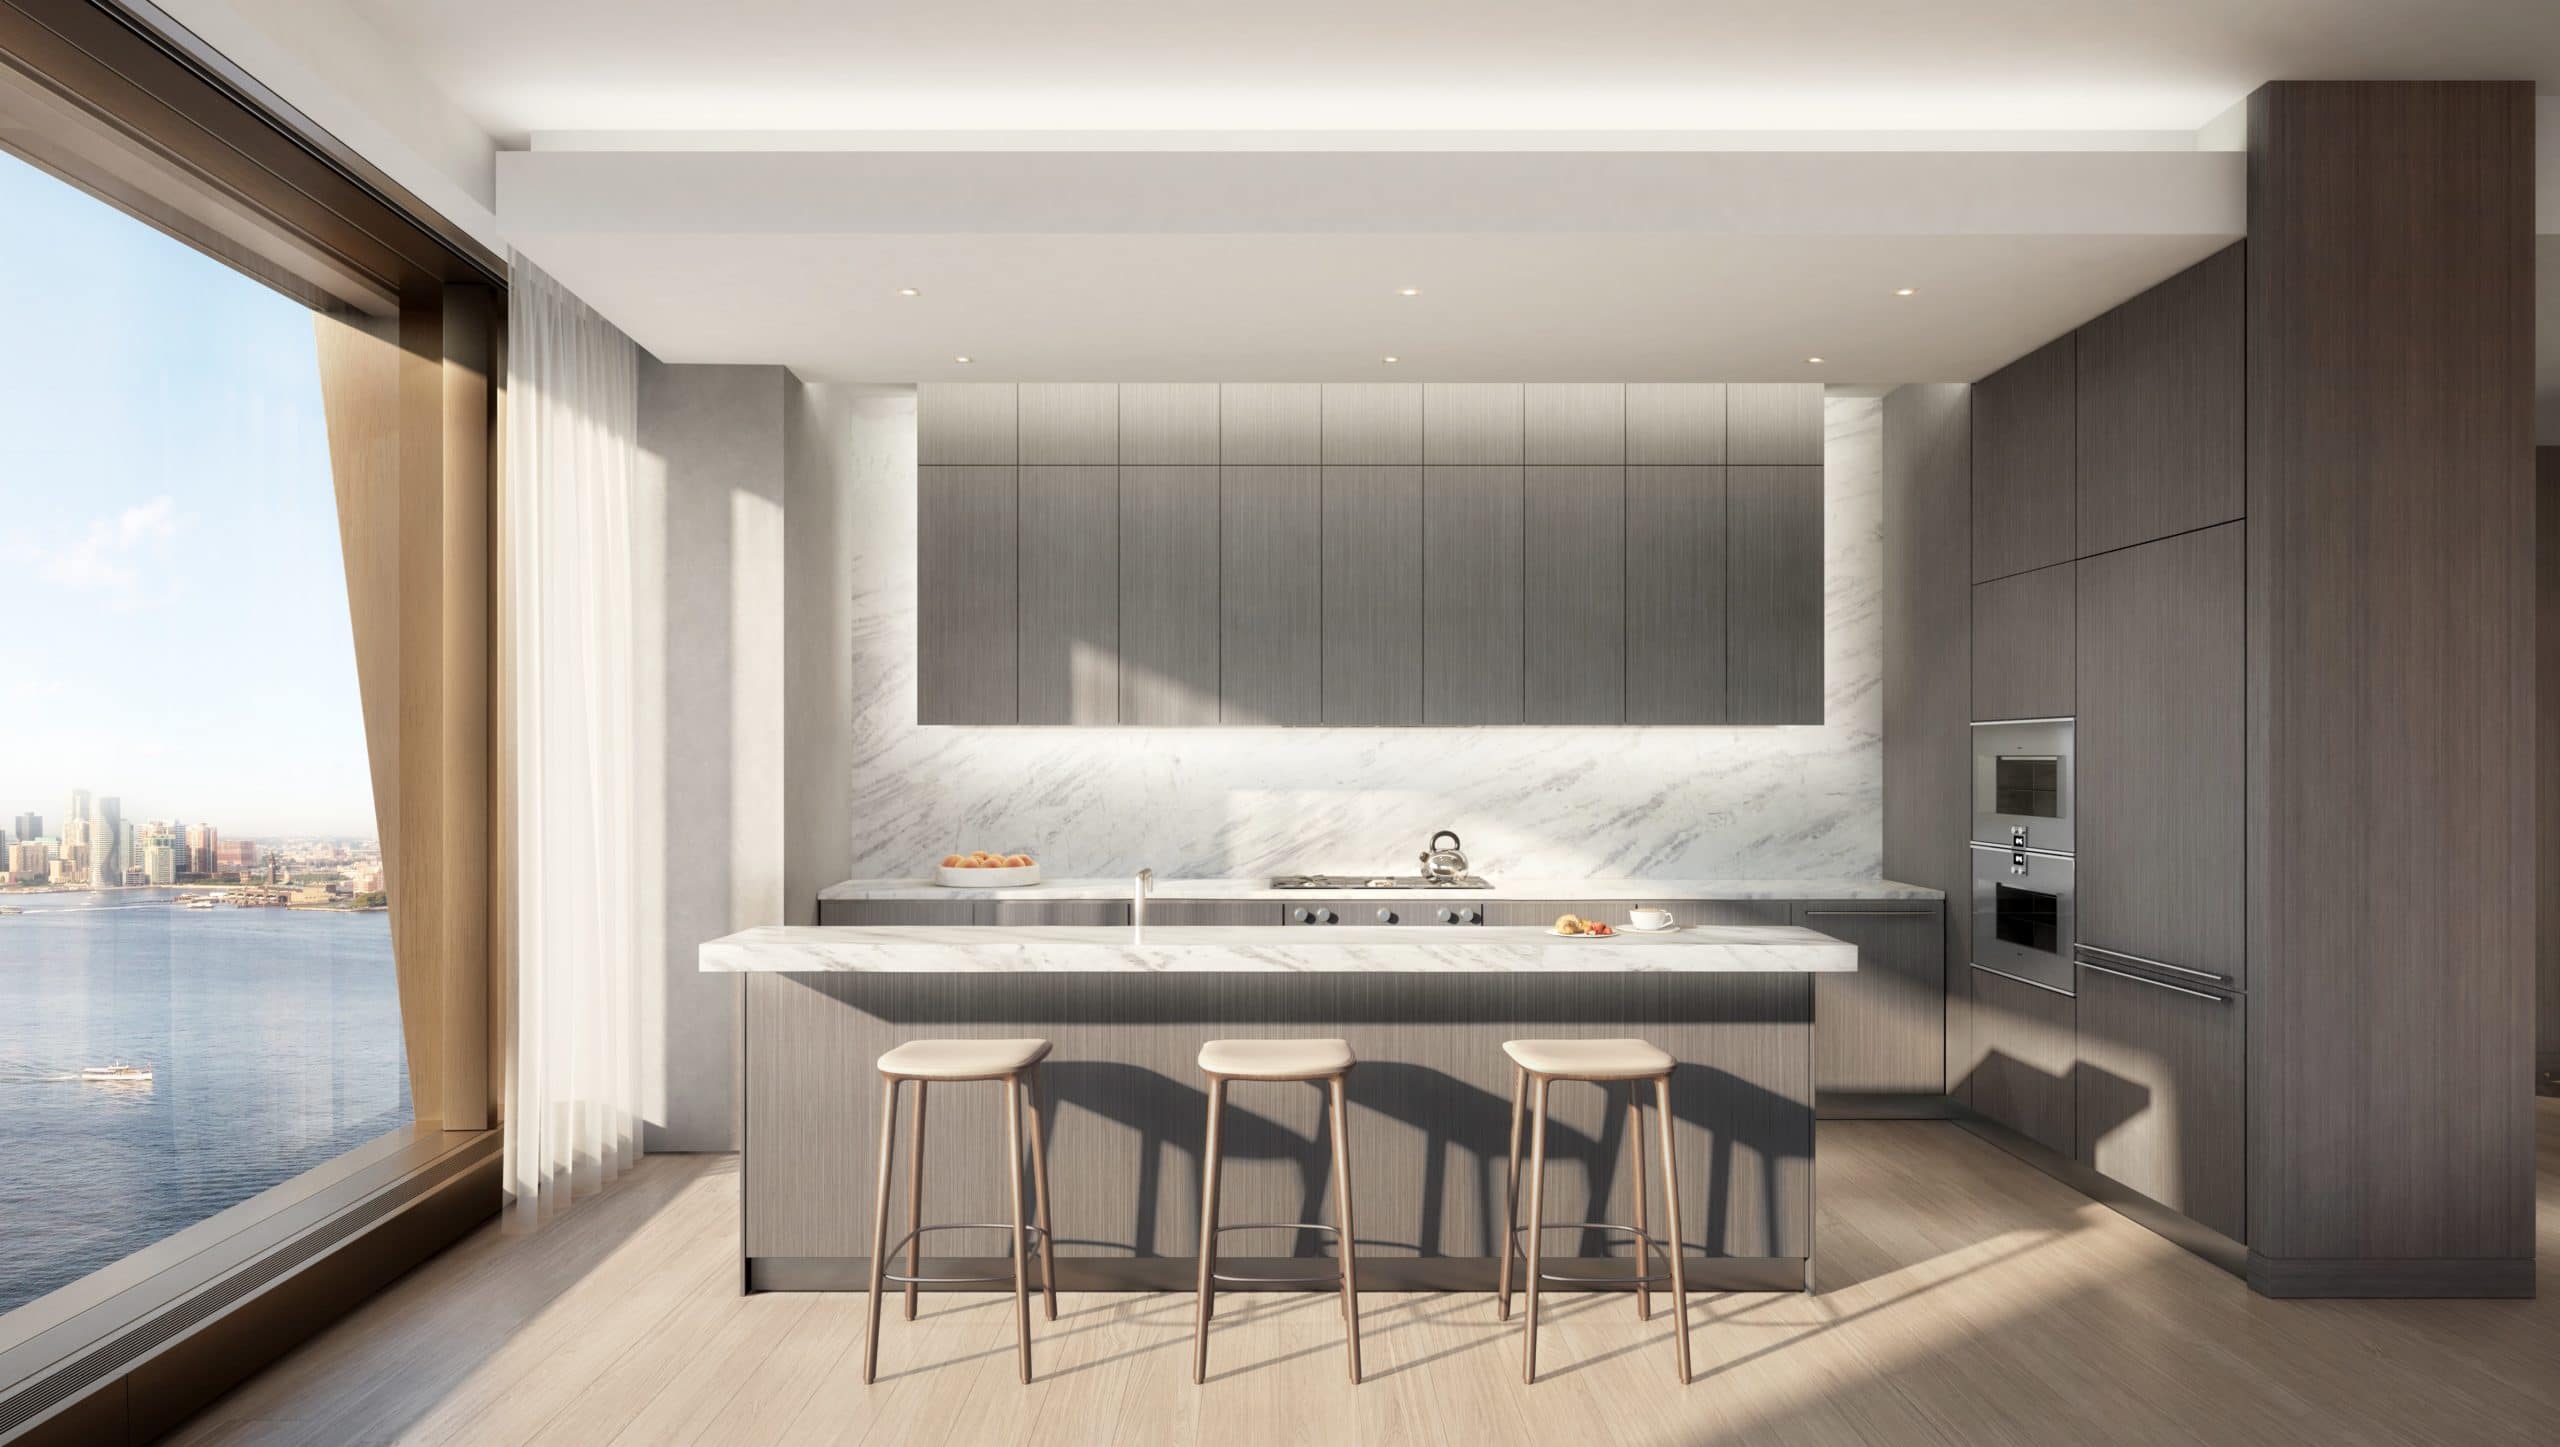 A kitchen at The Xi condos in New York. Gray walls and cabinets, a small island countertop and floor-to-ceiling windows.